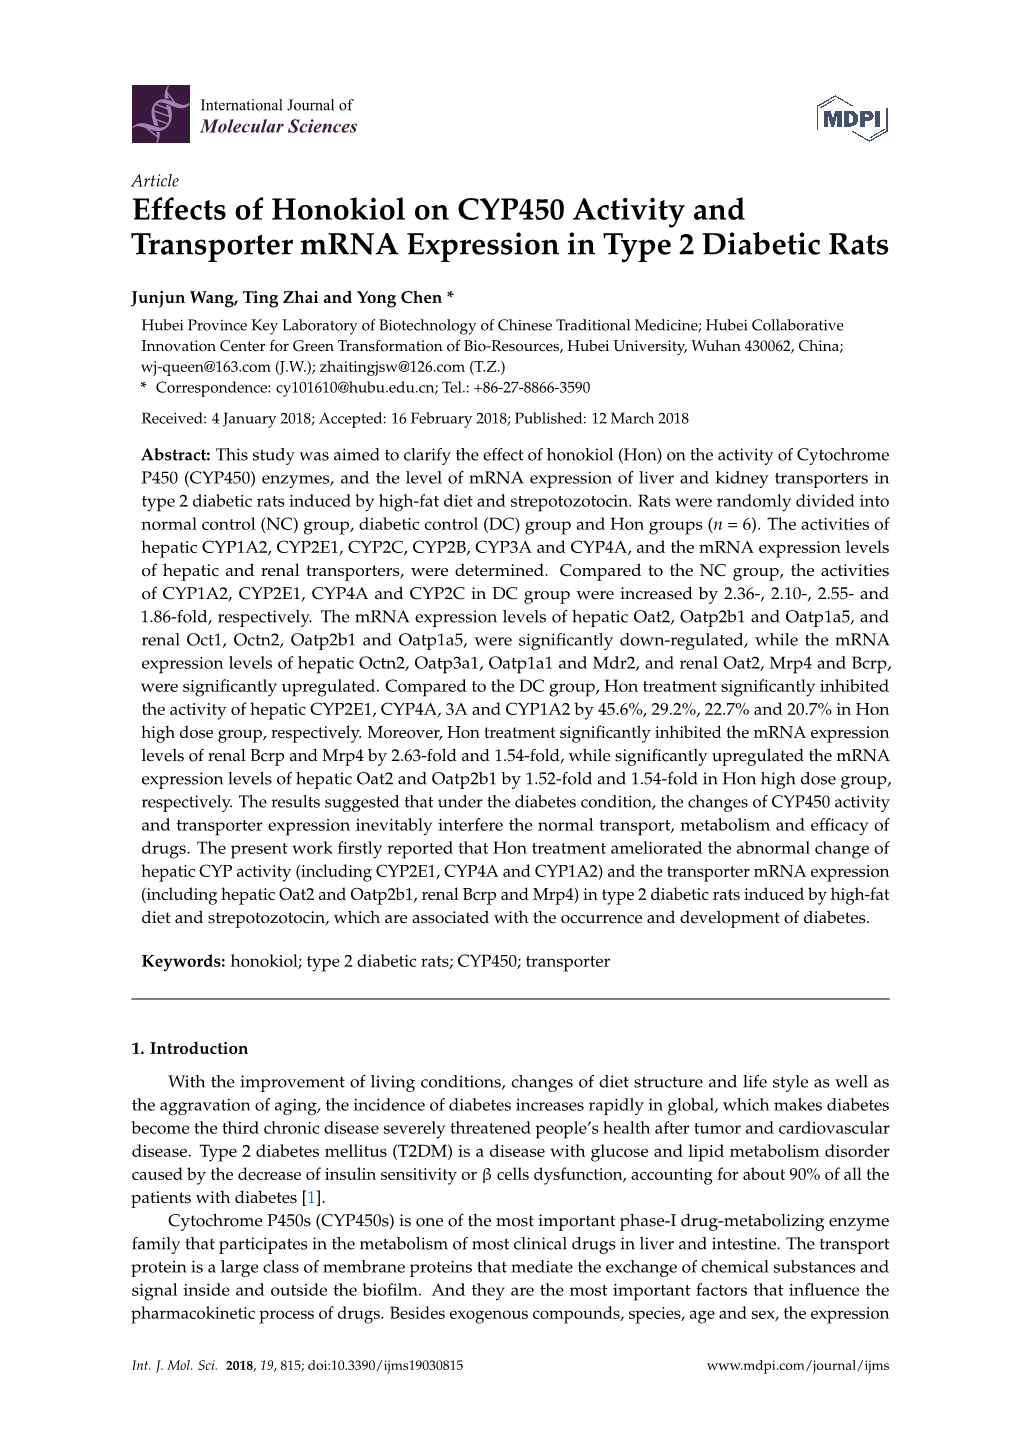 Effects of Honokiol on CYP450 Activity and Transporter Mrna Expression in Type 2 Diabetic Rats